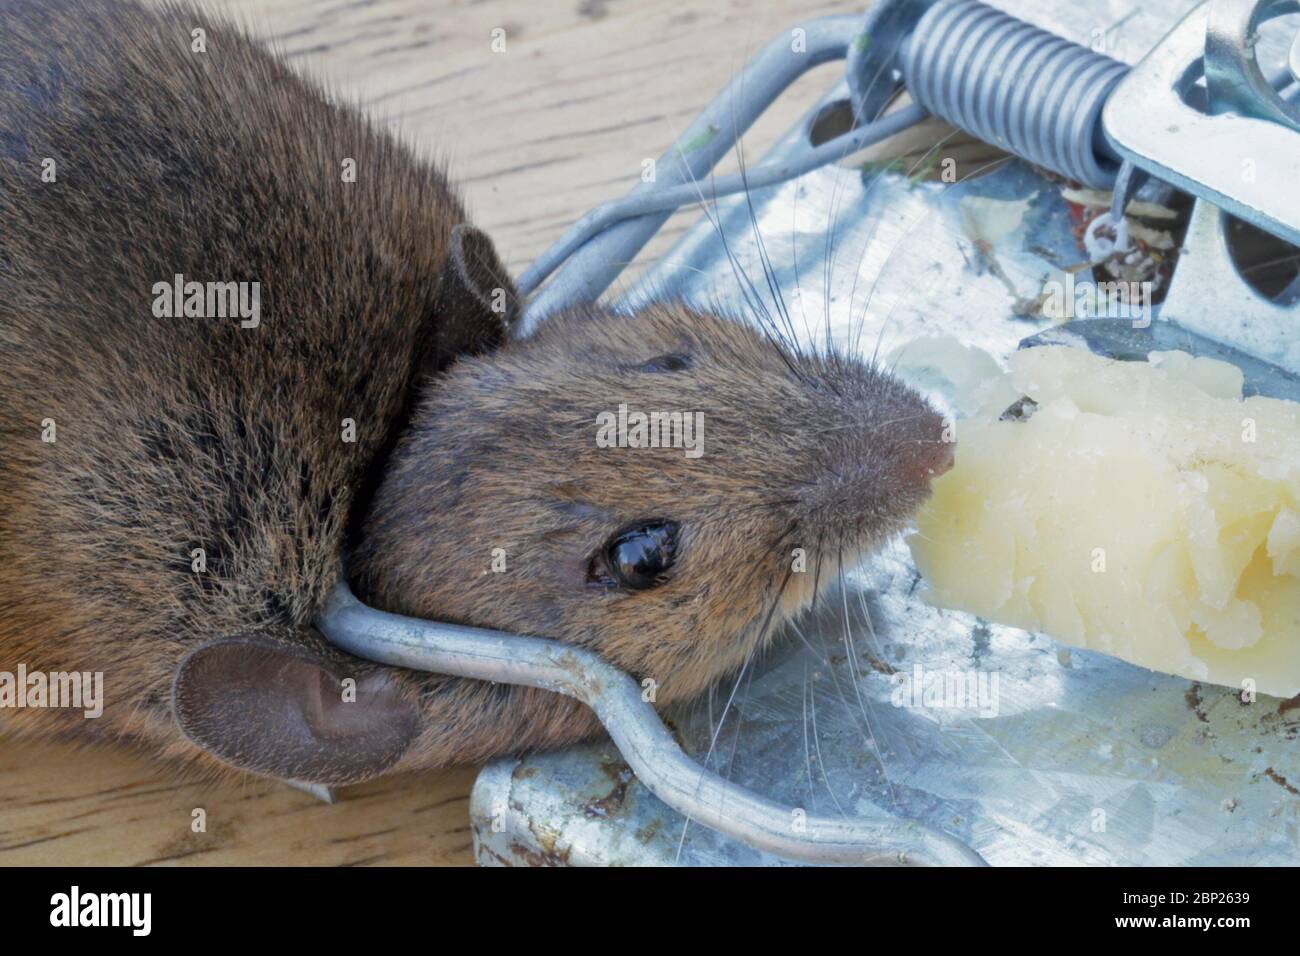 Mouse killed in a metal mouse trap. Stock Photo